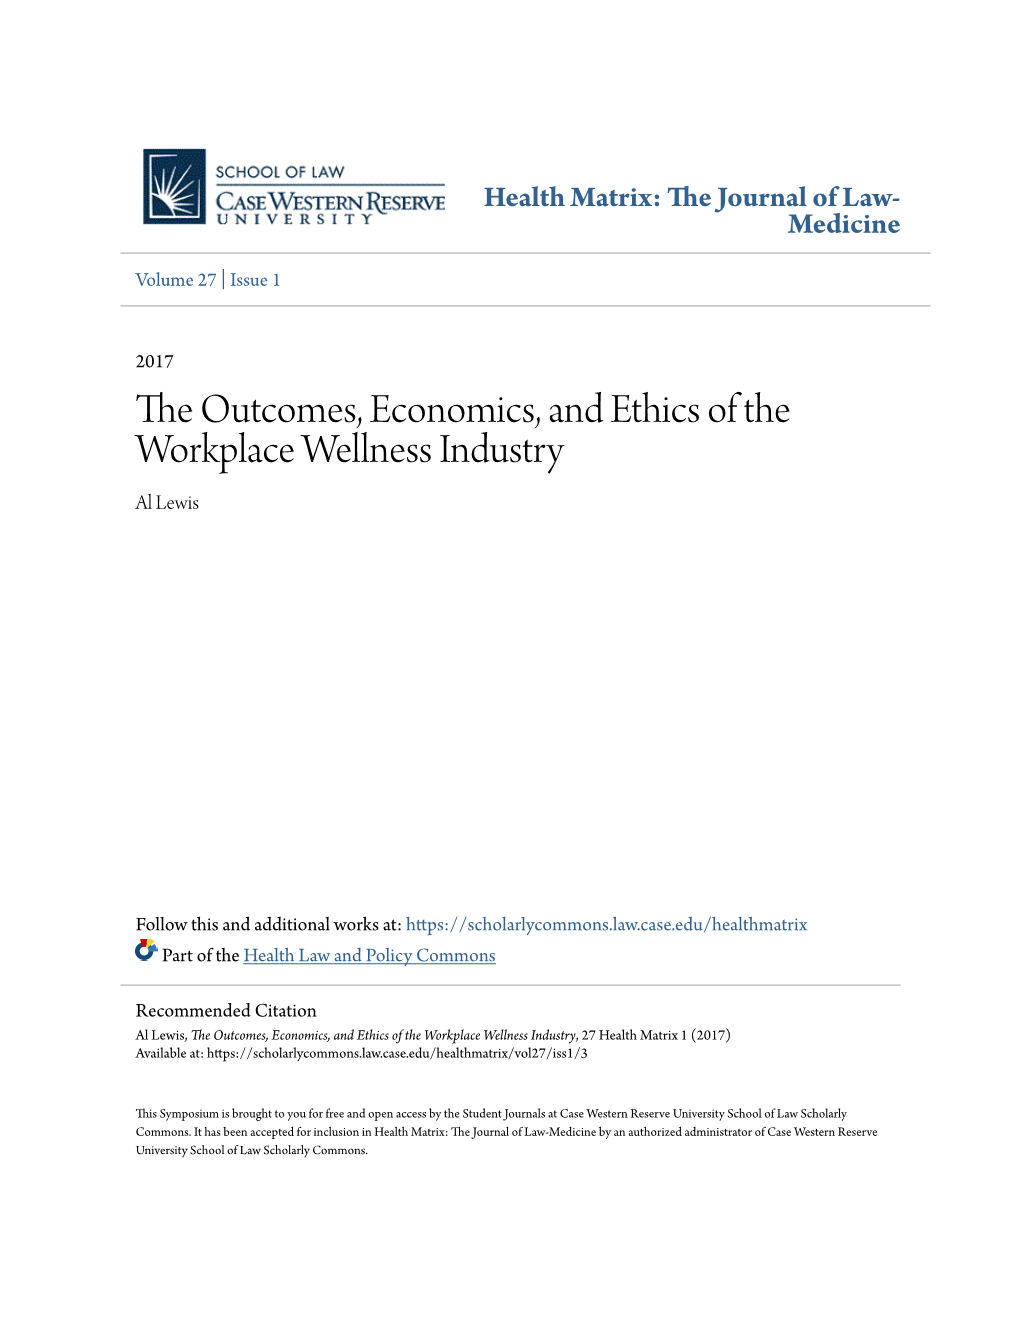 The Outcomes, Economics, and Ethics of the Workplace Wellness Industry Al Lewis